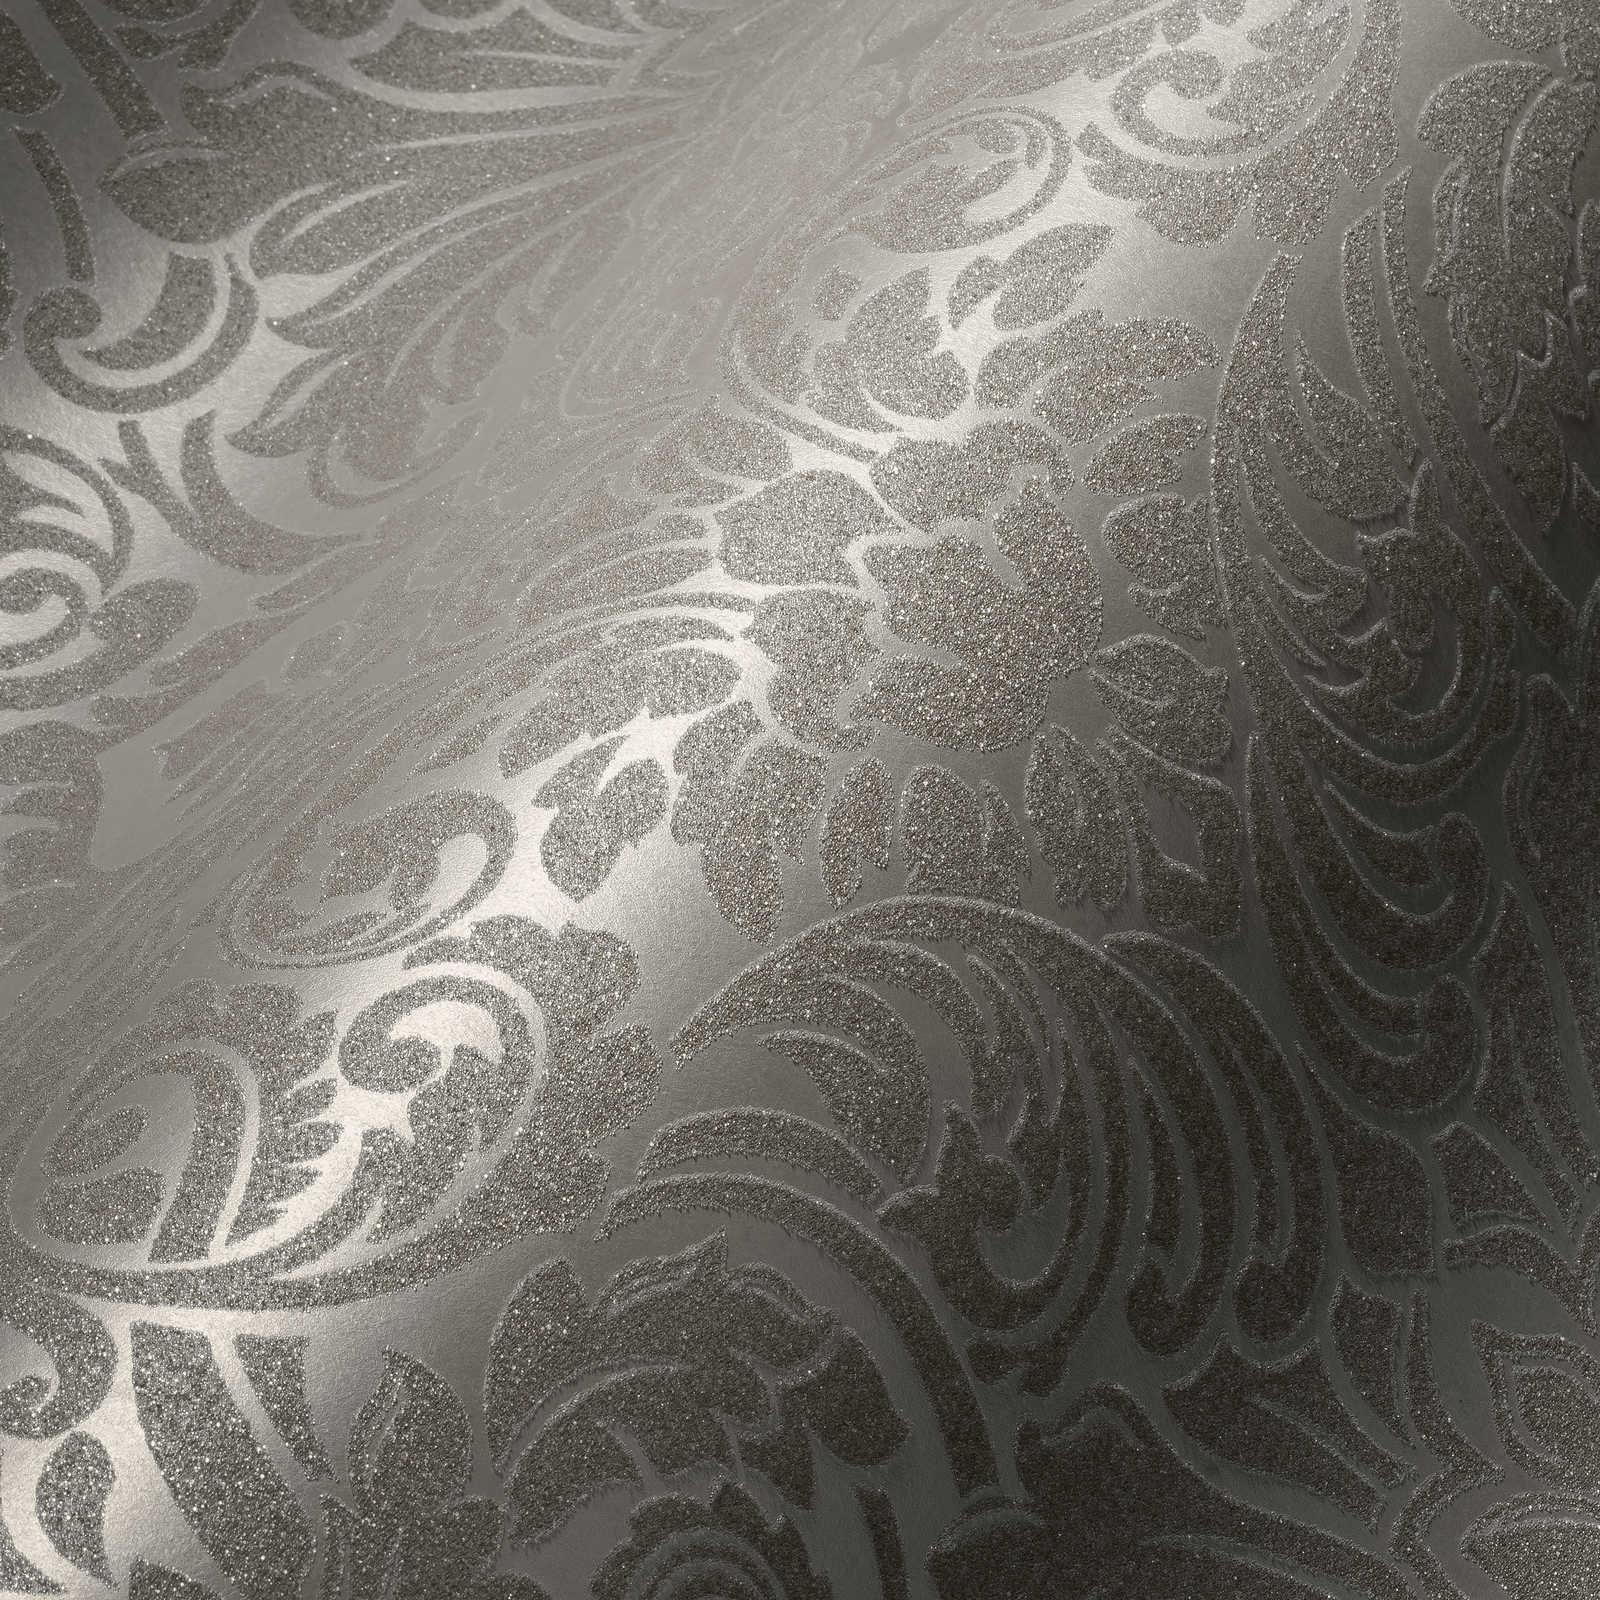             Ornamental wallpaper with metallic effect and floral design - silver, cream
        